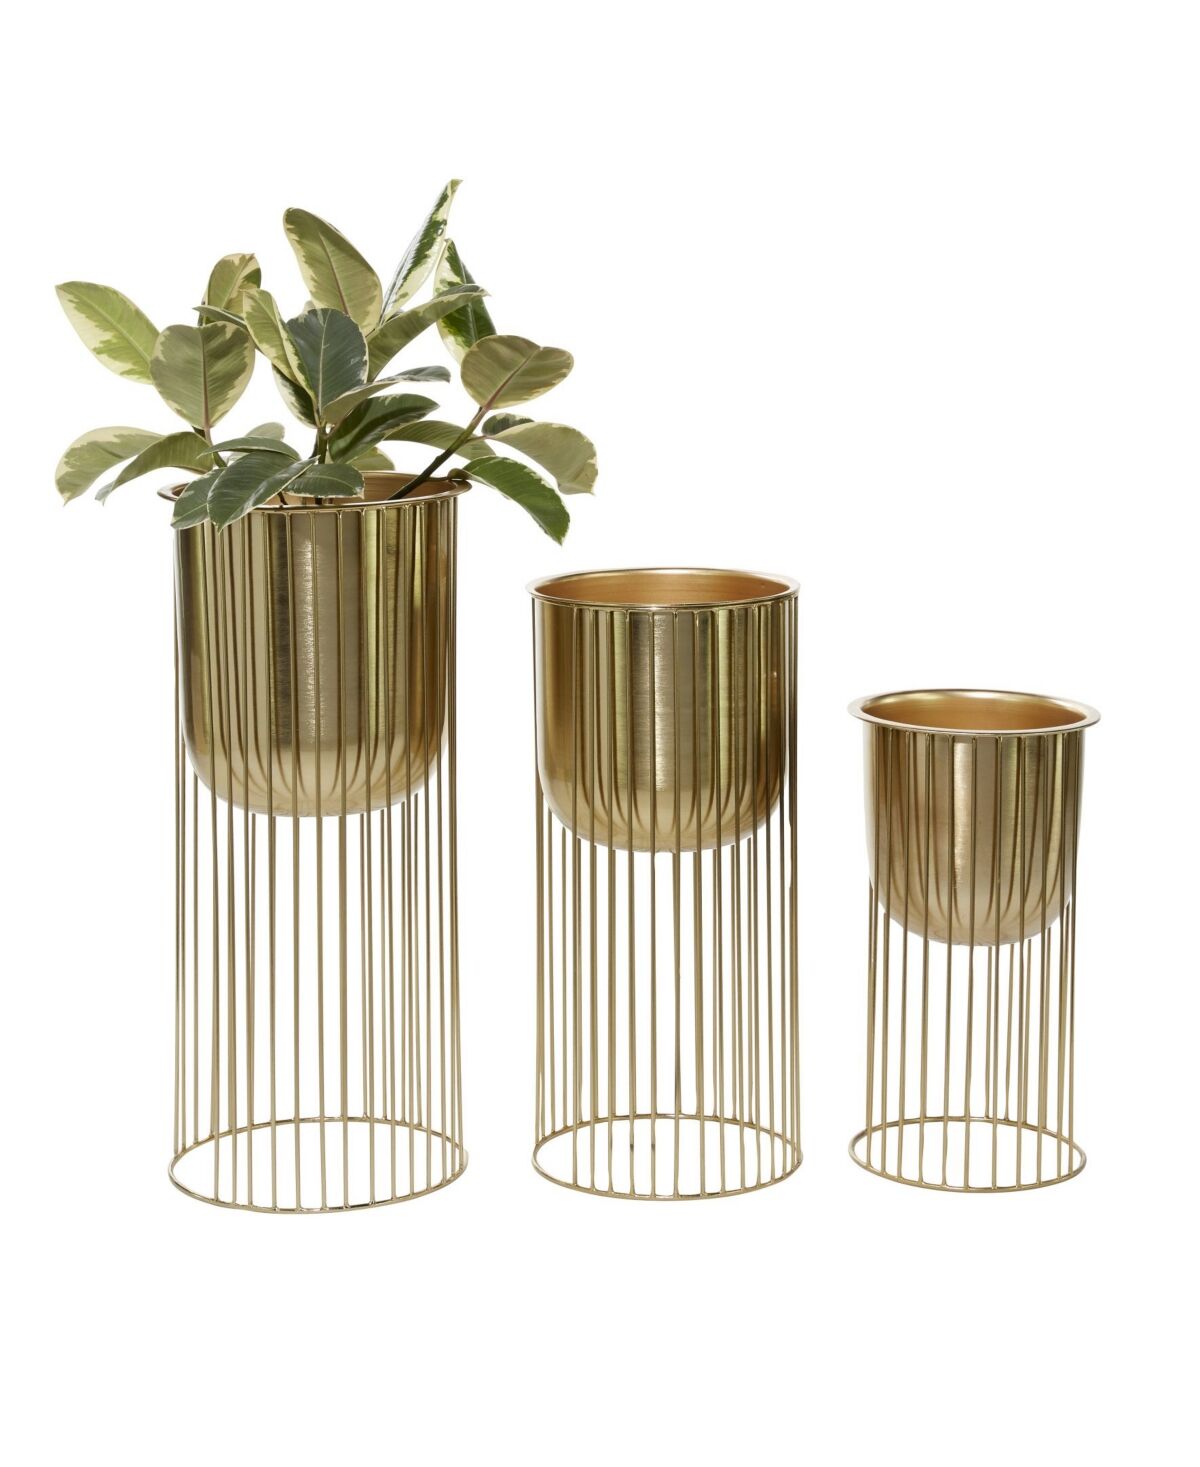 Rosemary Lane Large Eclectic Metal Planters with Stands, Set of 3 - Gold-tone